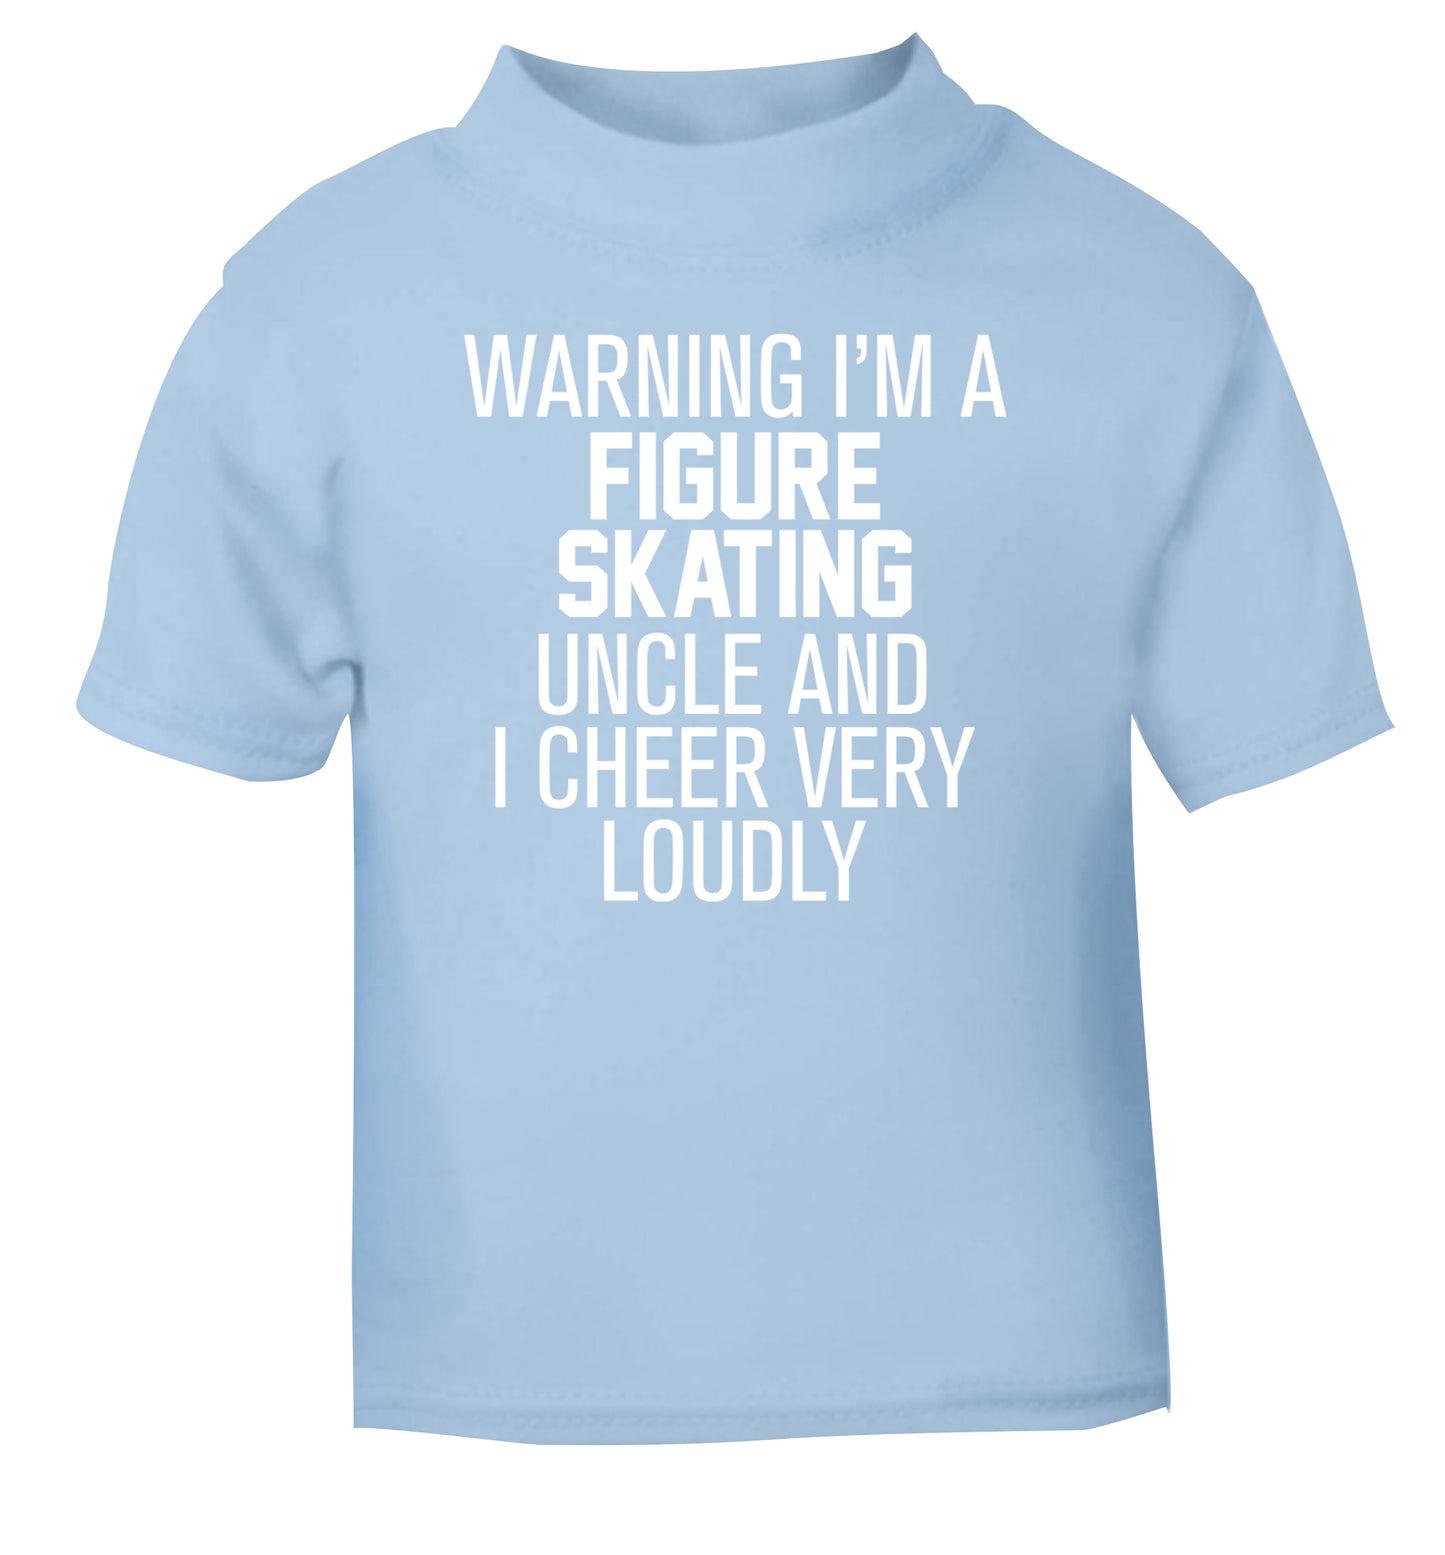 Warning I'm a figure skating uncle and I cheer very loudly light blue Baby Toddler Tshirt 2 Years